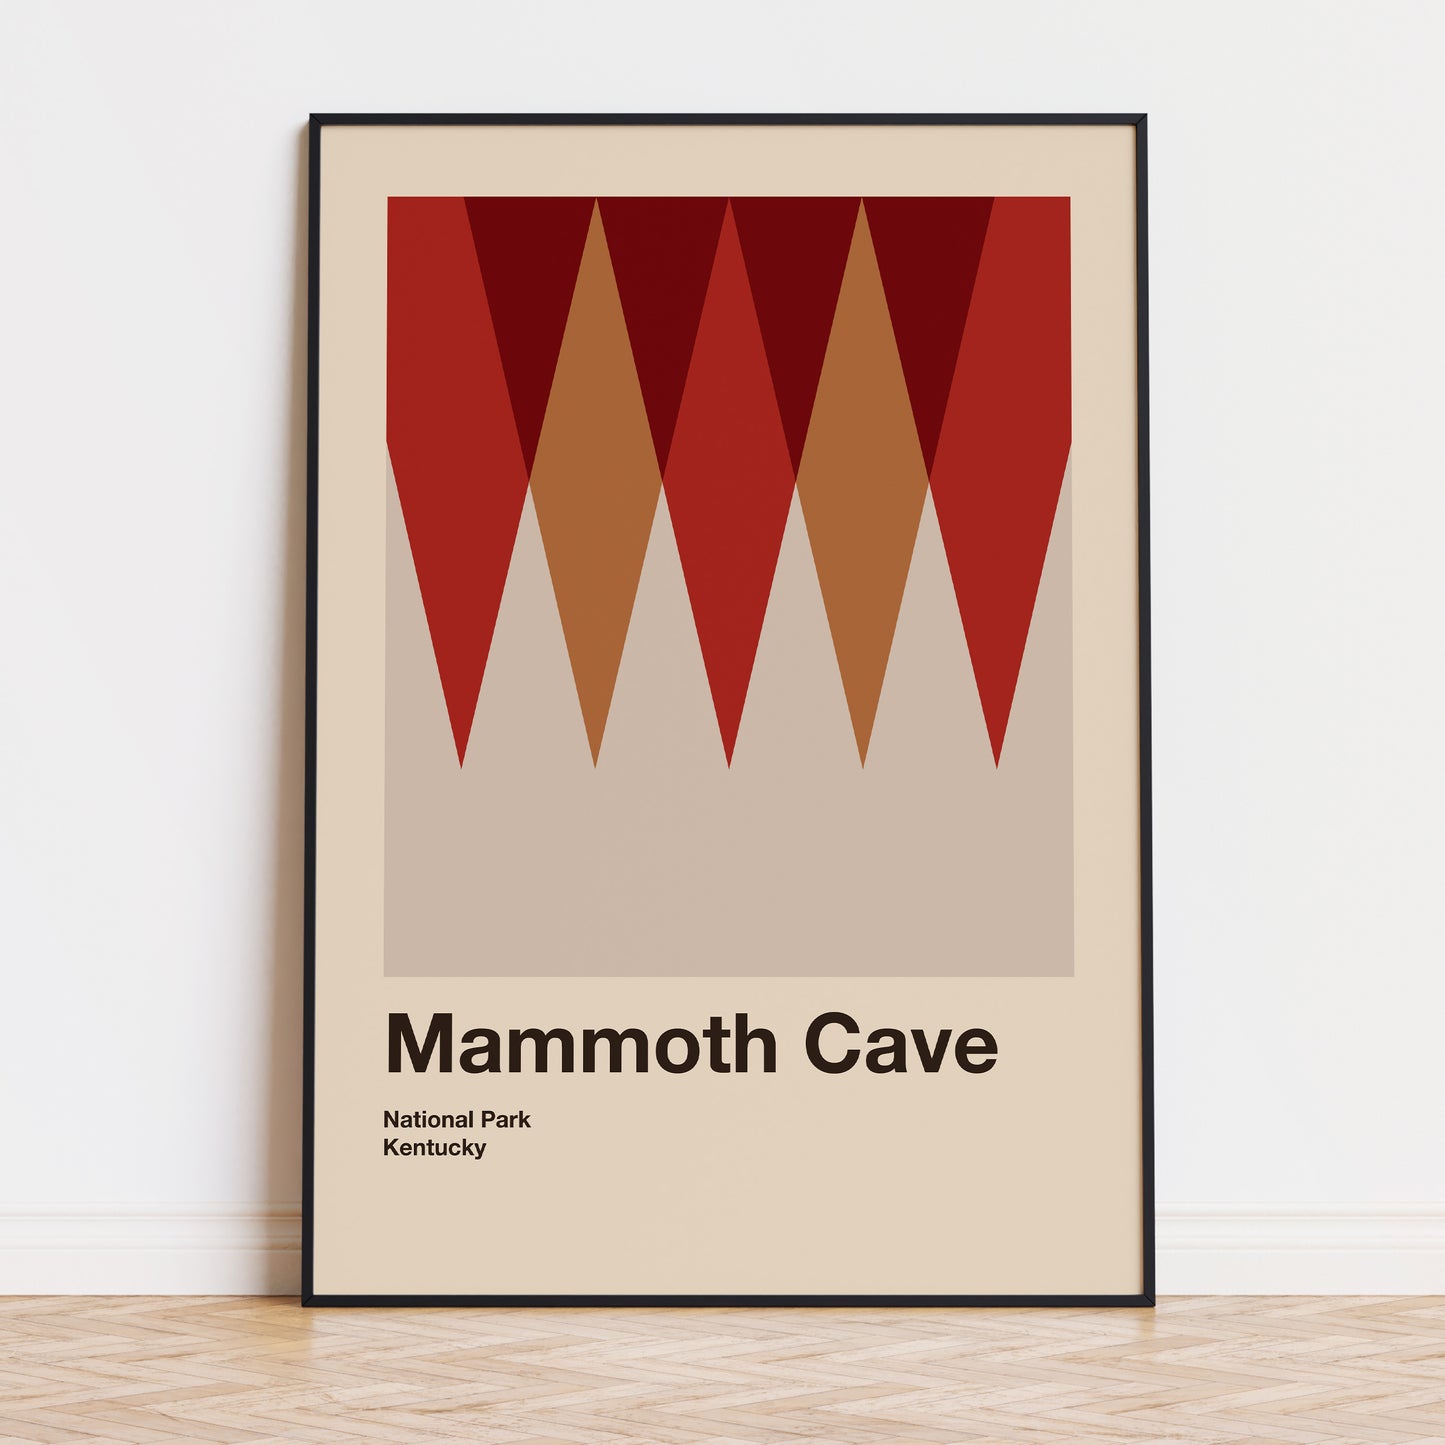 Mammoth Cave National Park - Print Material - mammoth cave, national park prints, travel poster